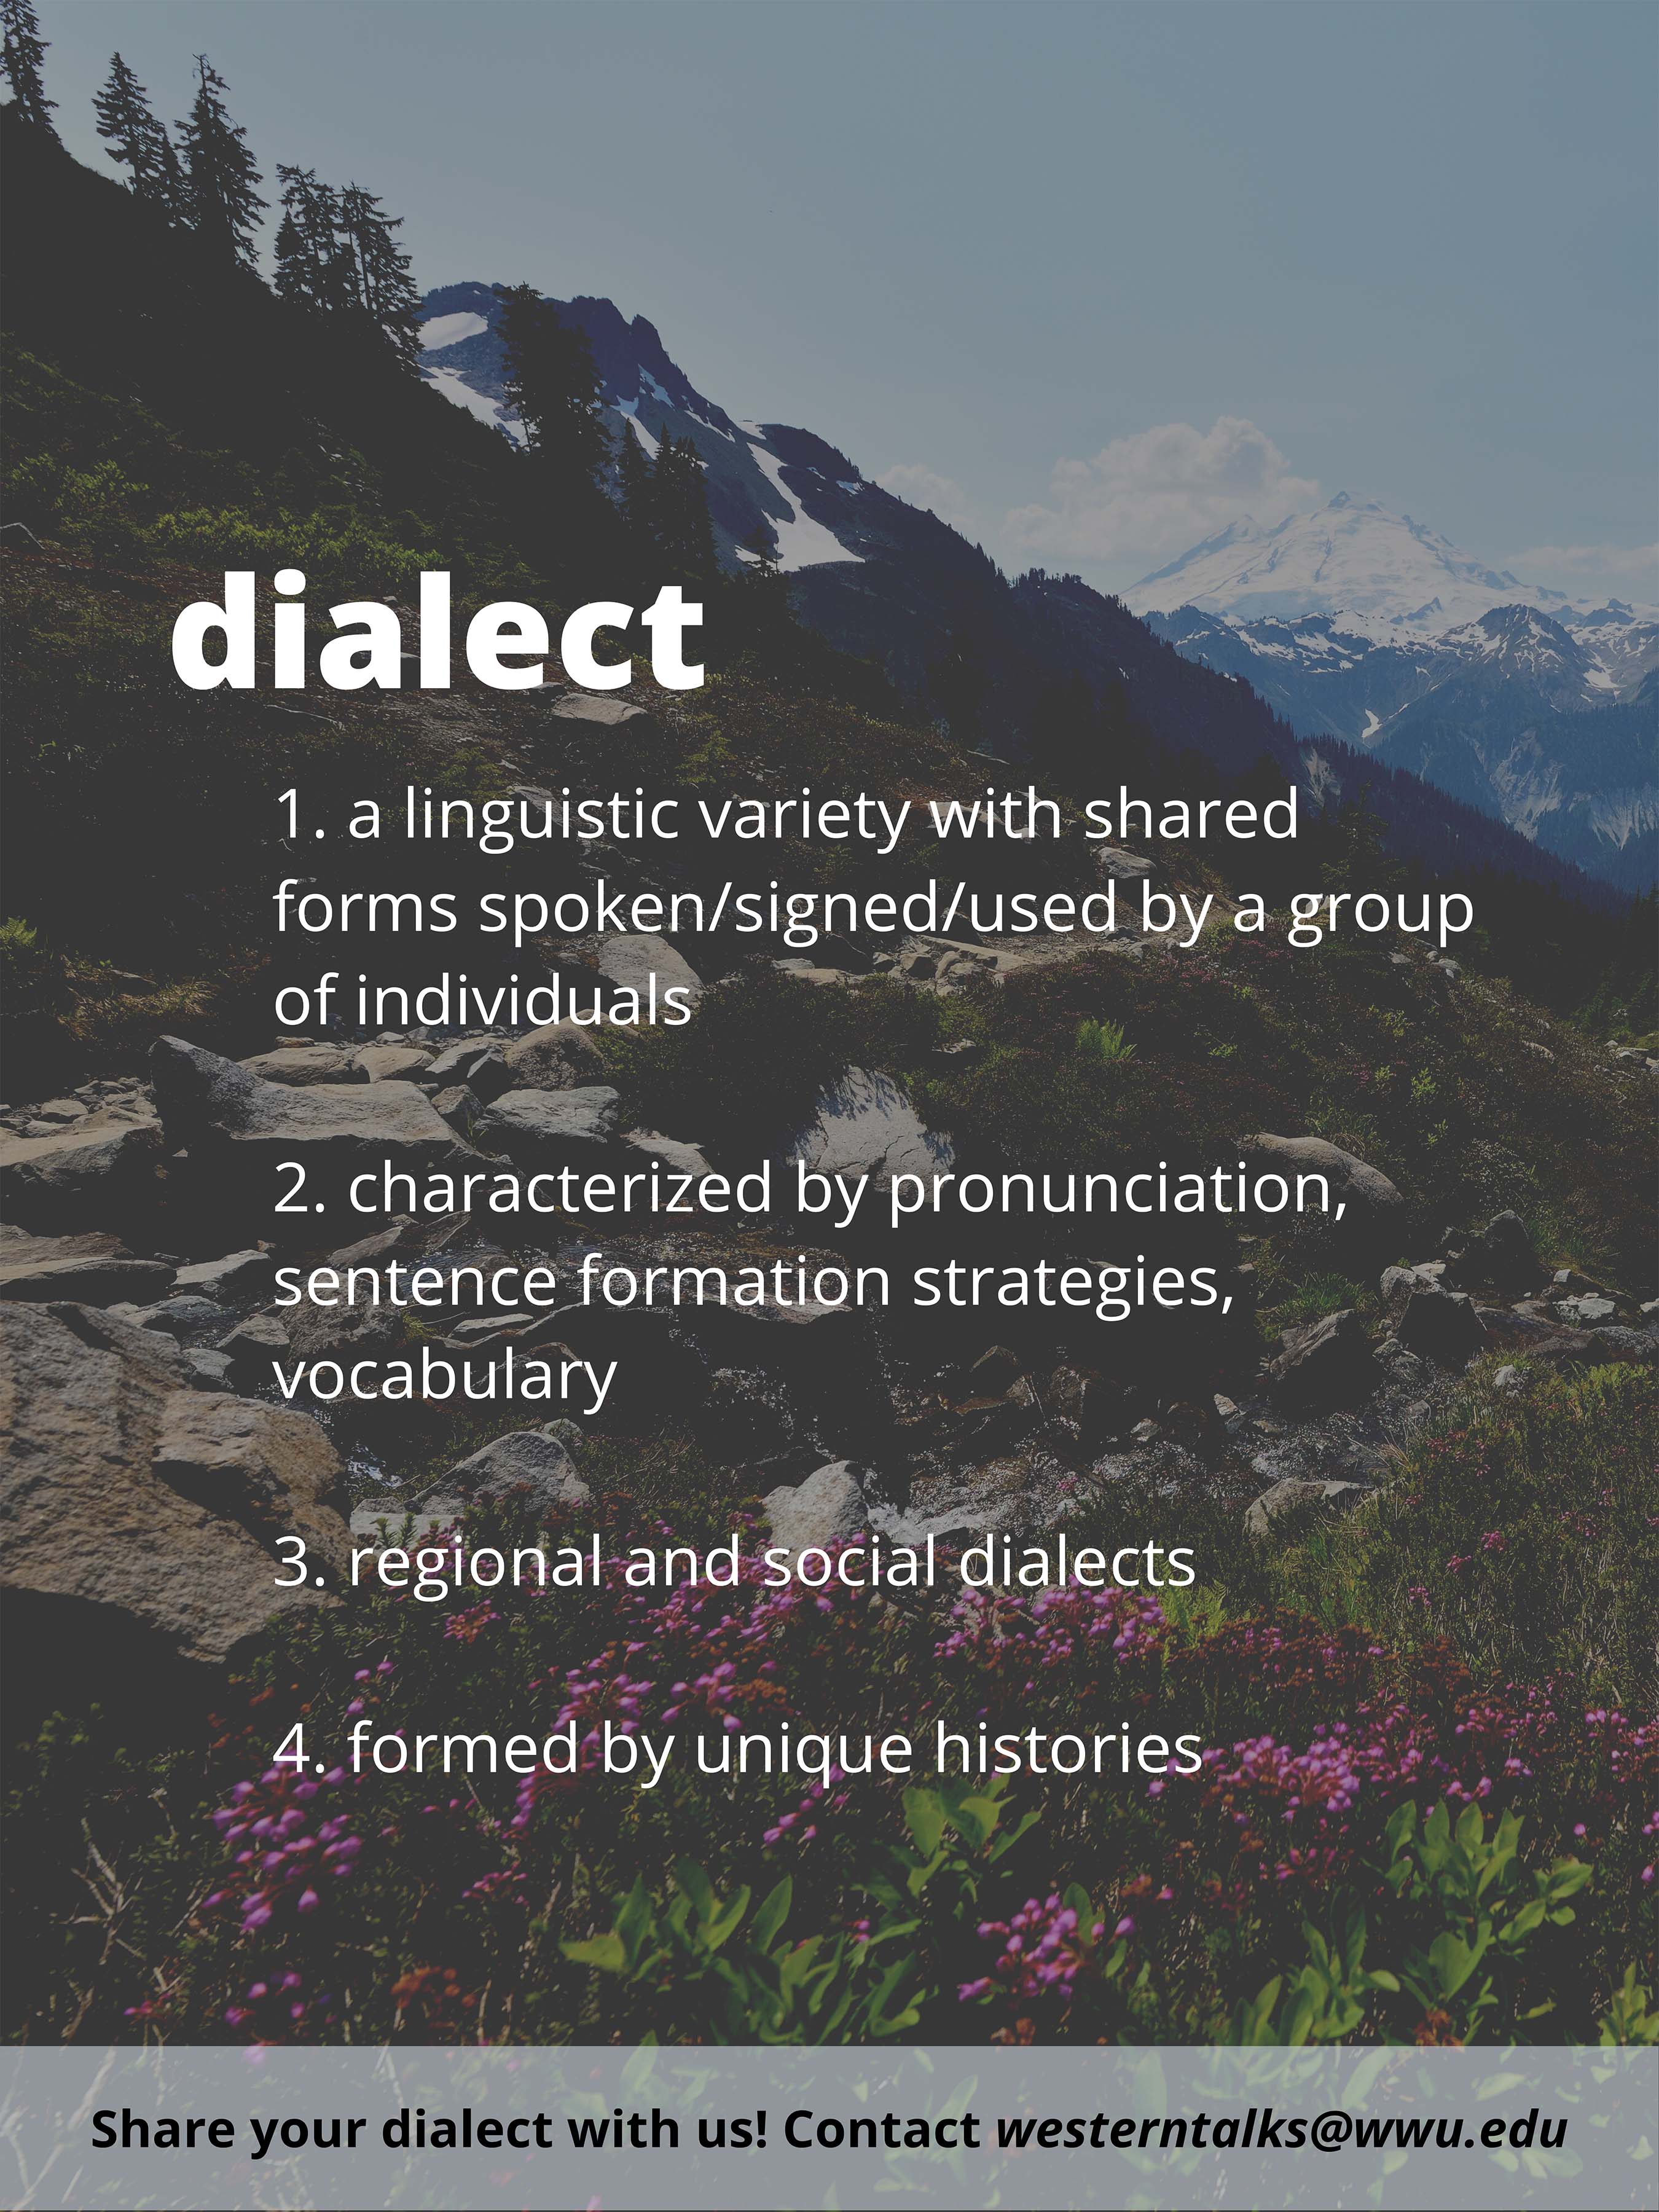 Definition of 'dialect.' Click on image to see full description.